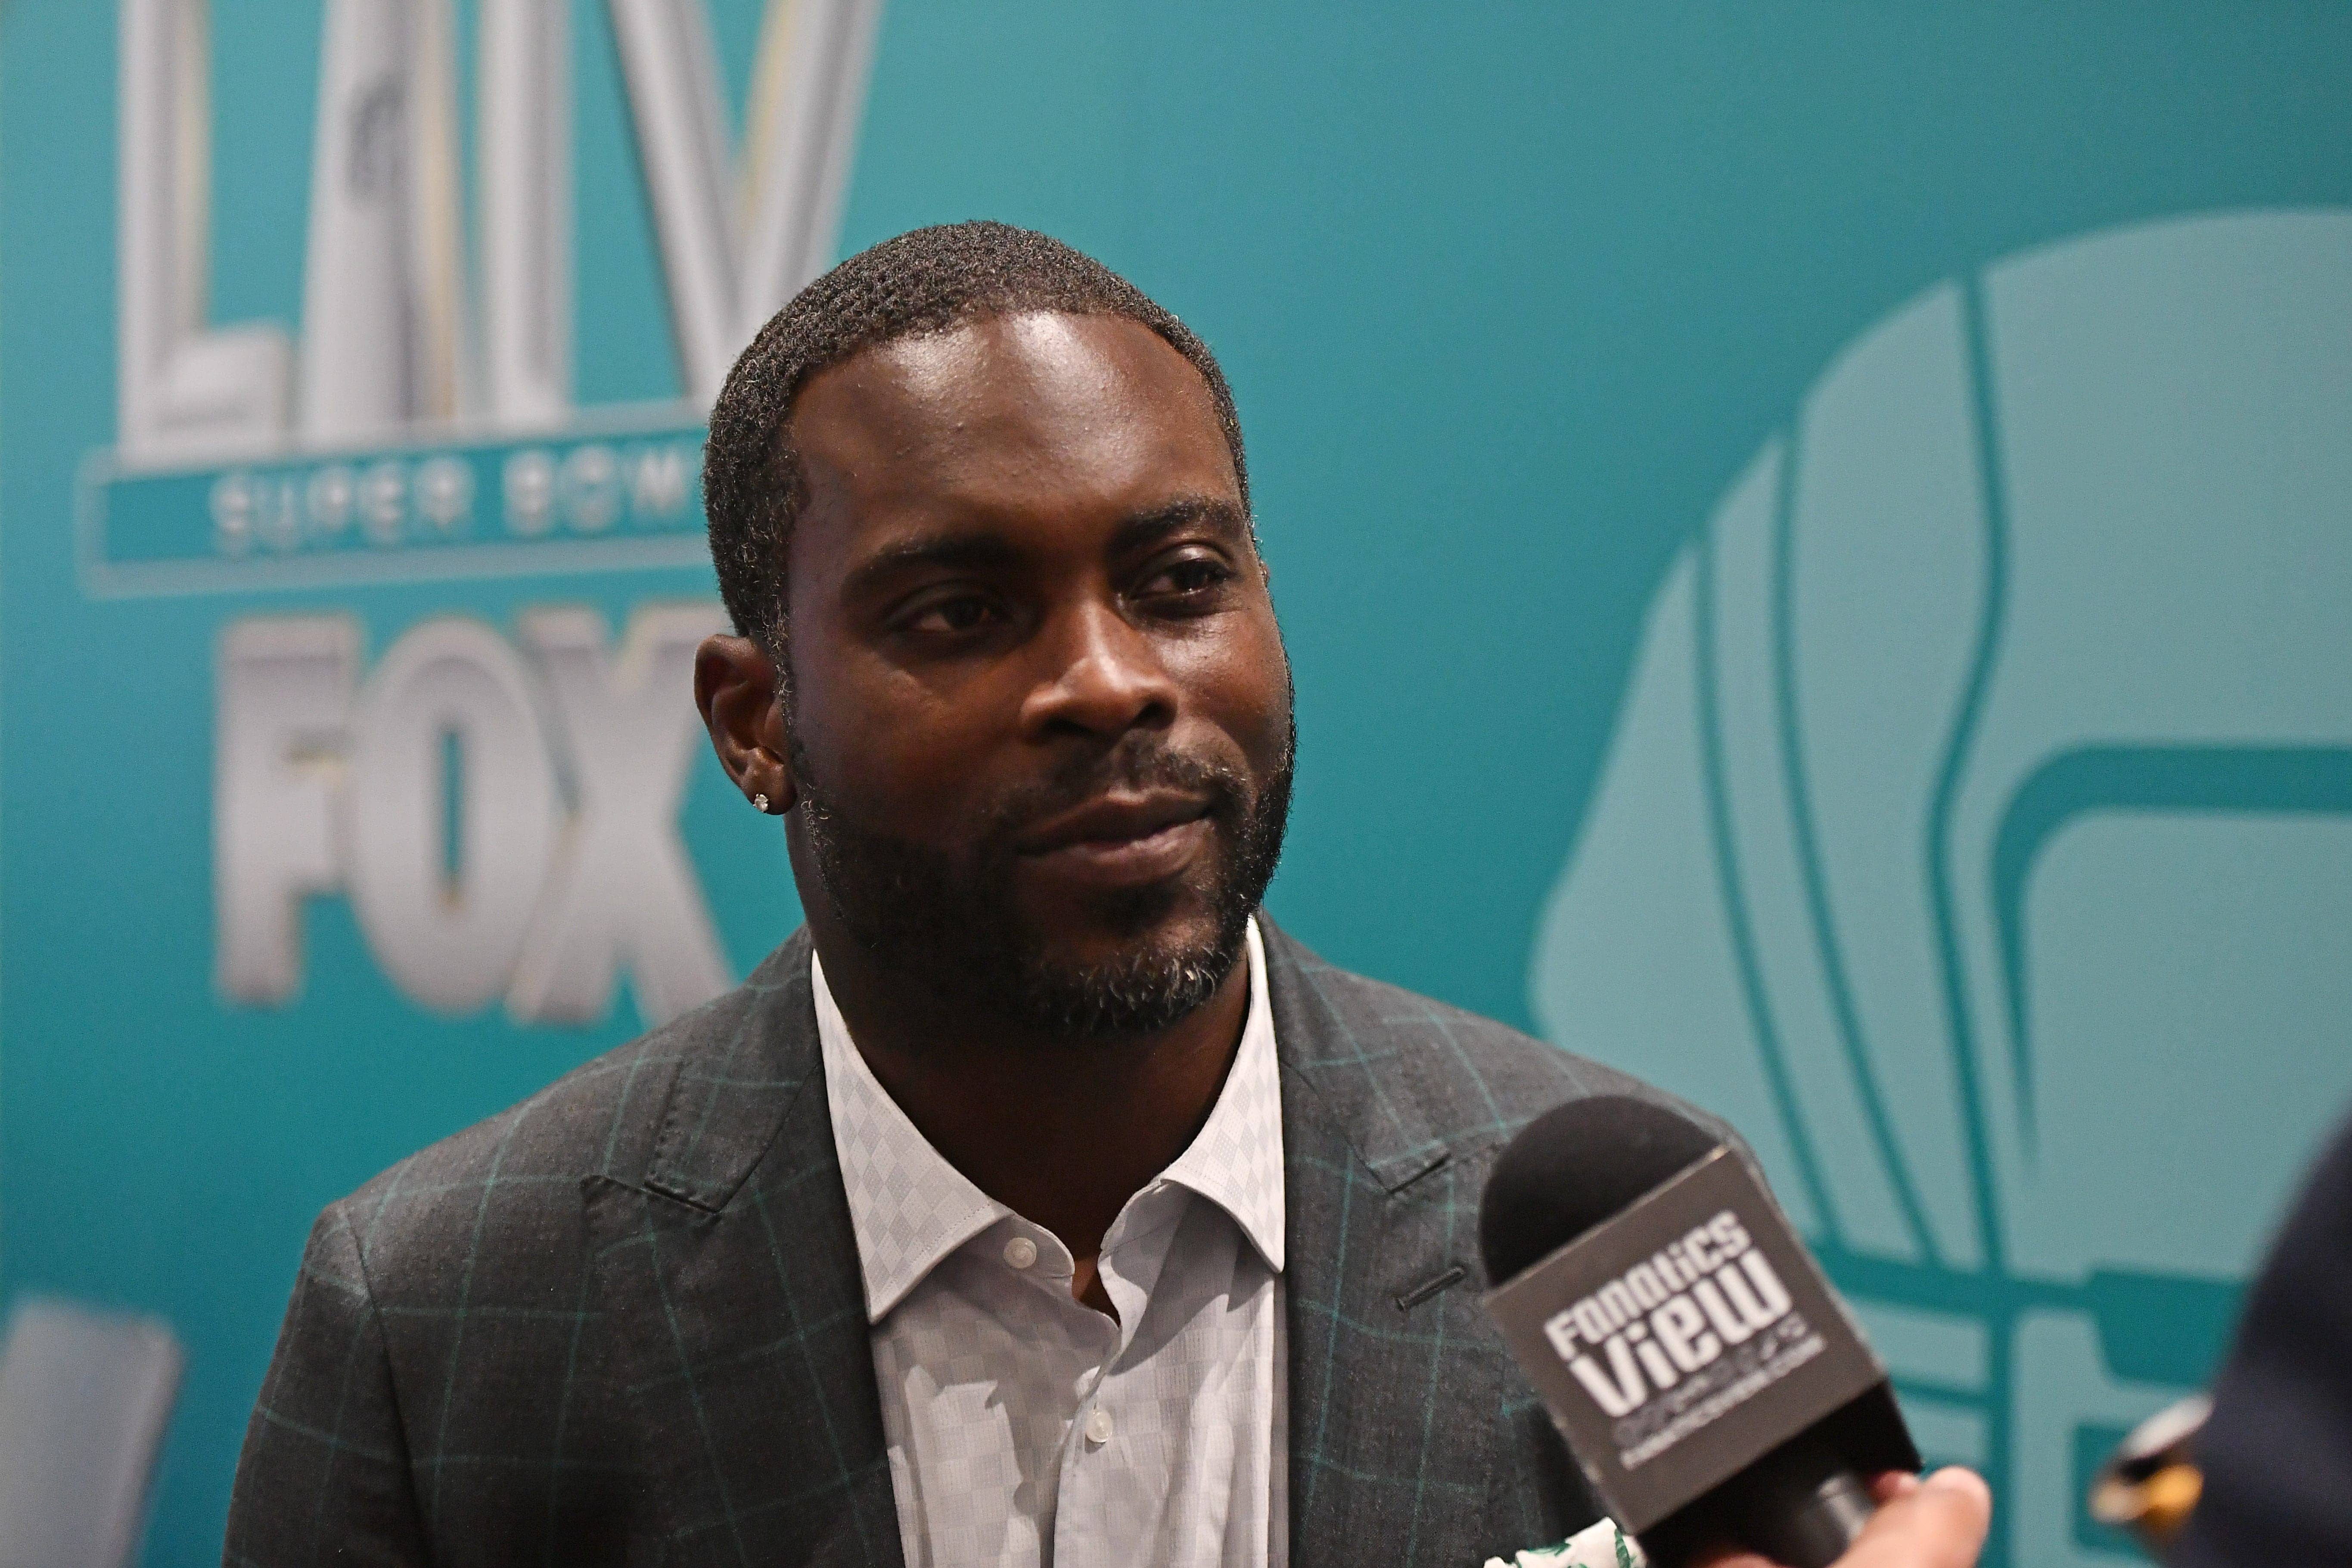 JR SportBrief Michael Vick not getting into Hall of Fame CBS Sports